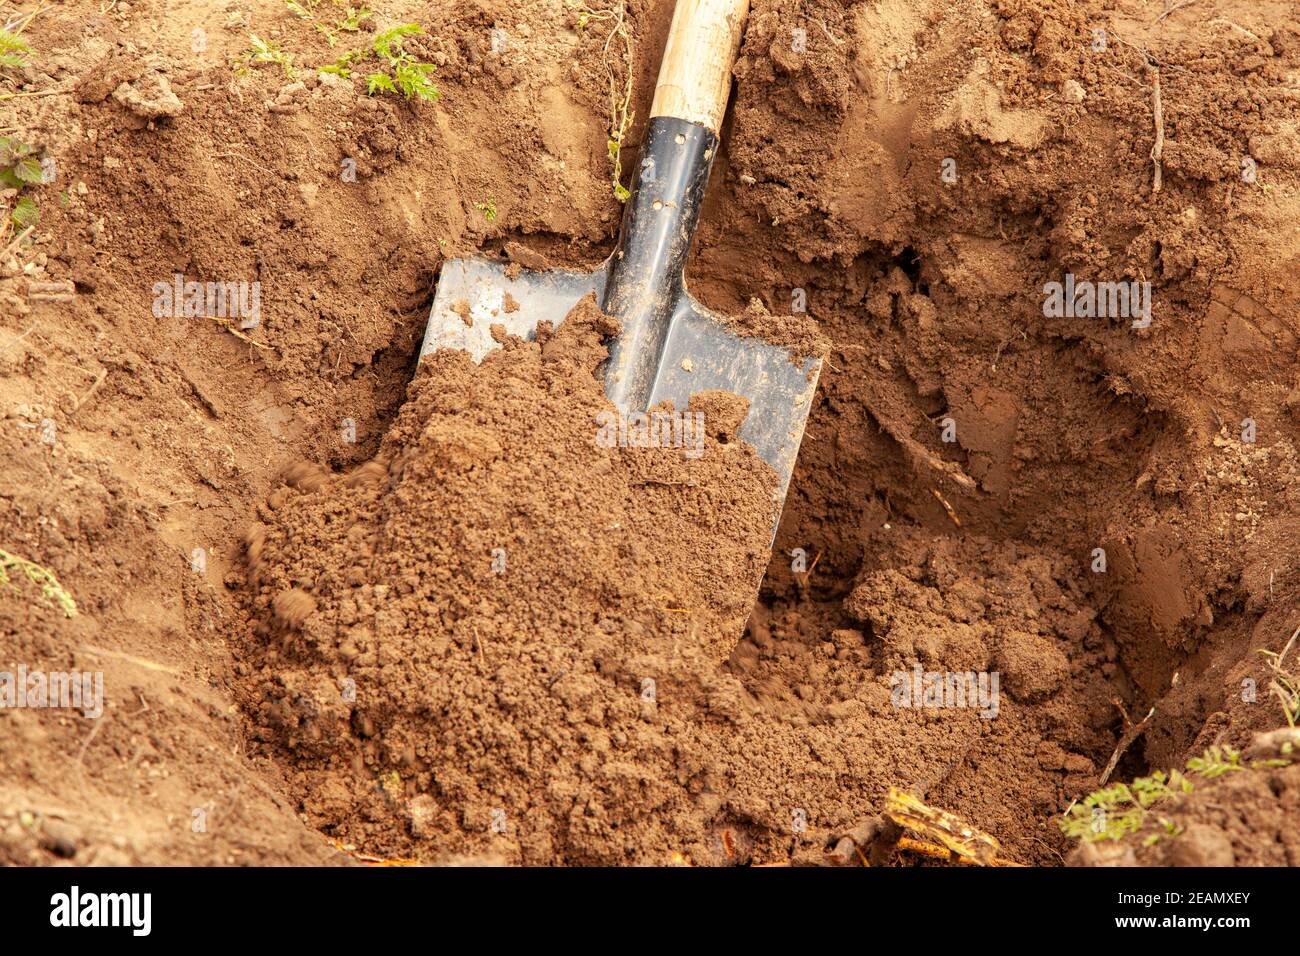 Digging a hole by shovel in a clay soil for planting a young tree Stock Photo